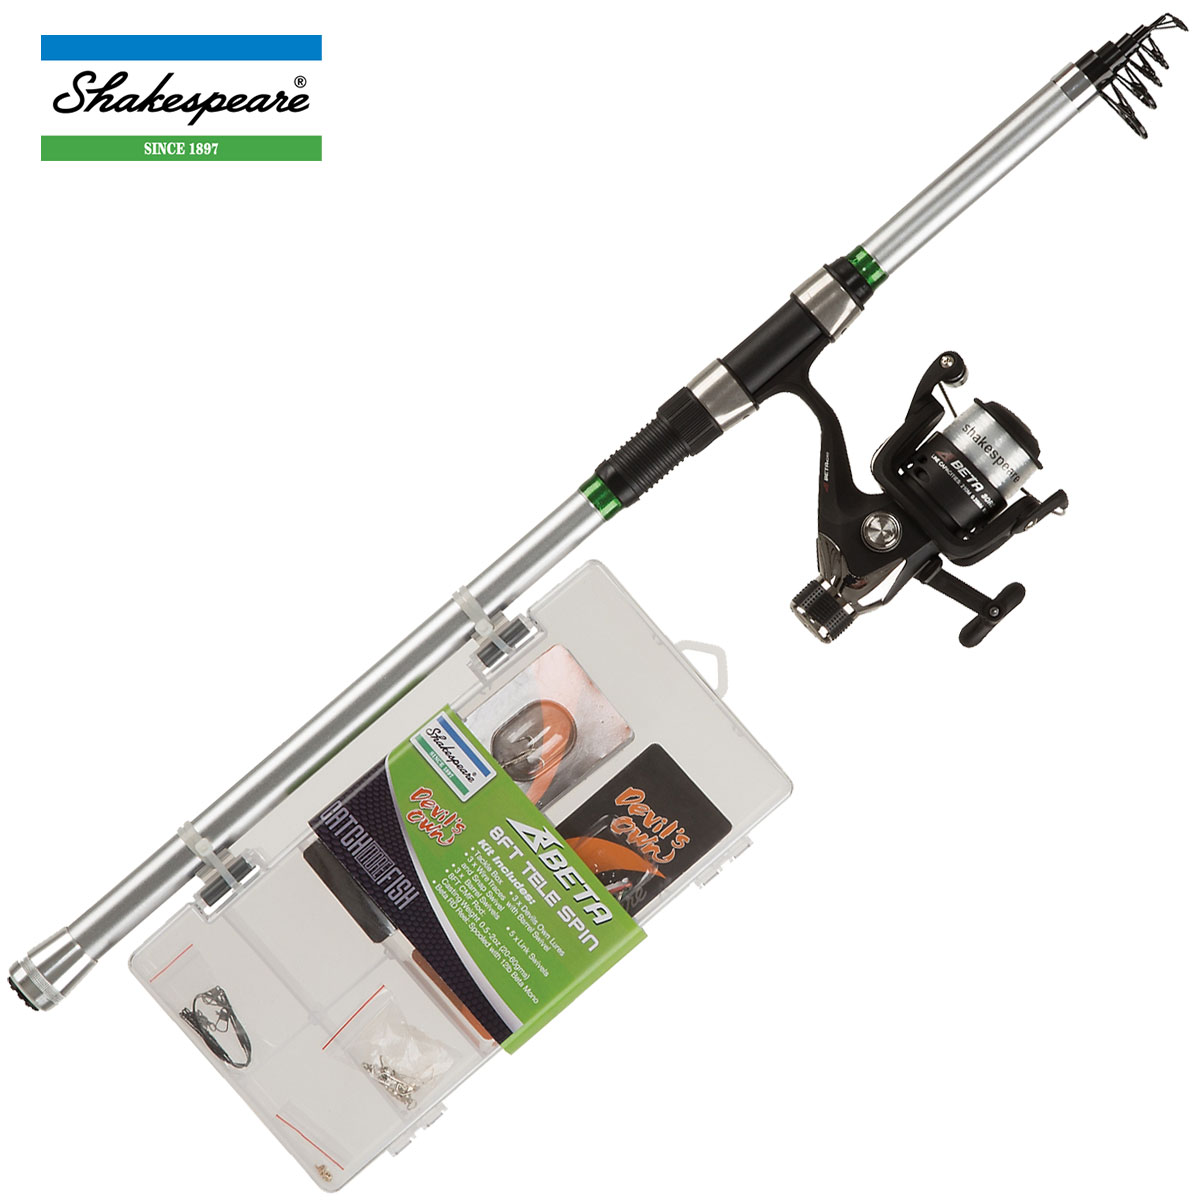 Shakespeare CATCH MORE FISH 2 Tele Spin 8FT Combo